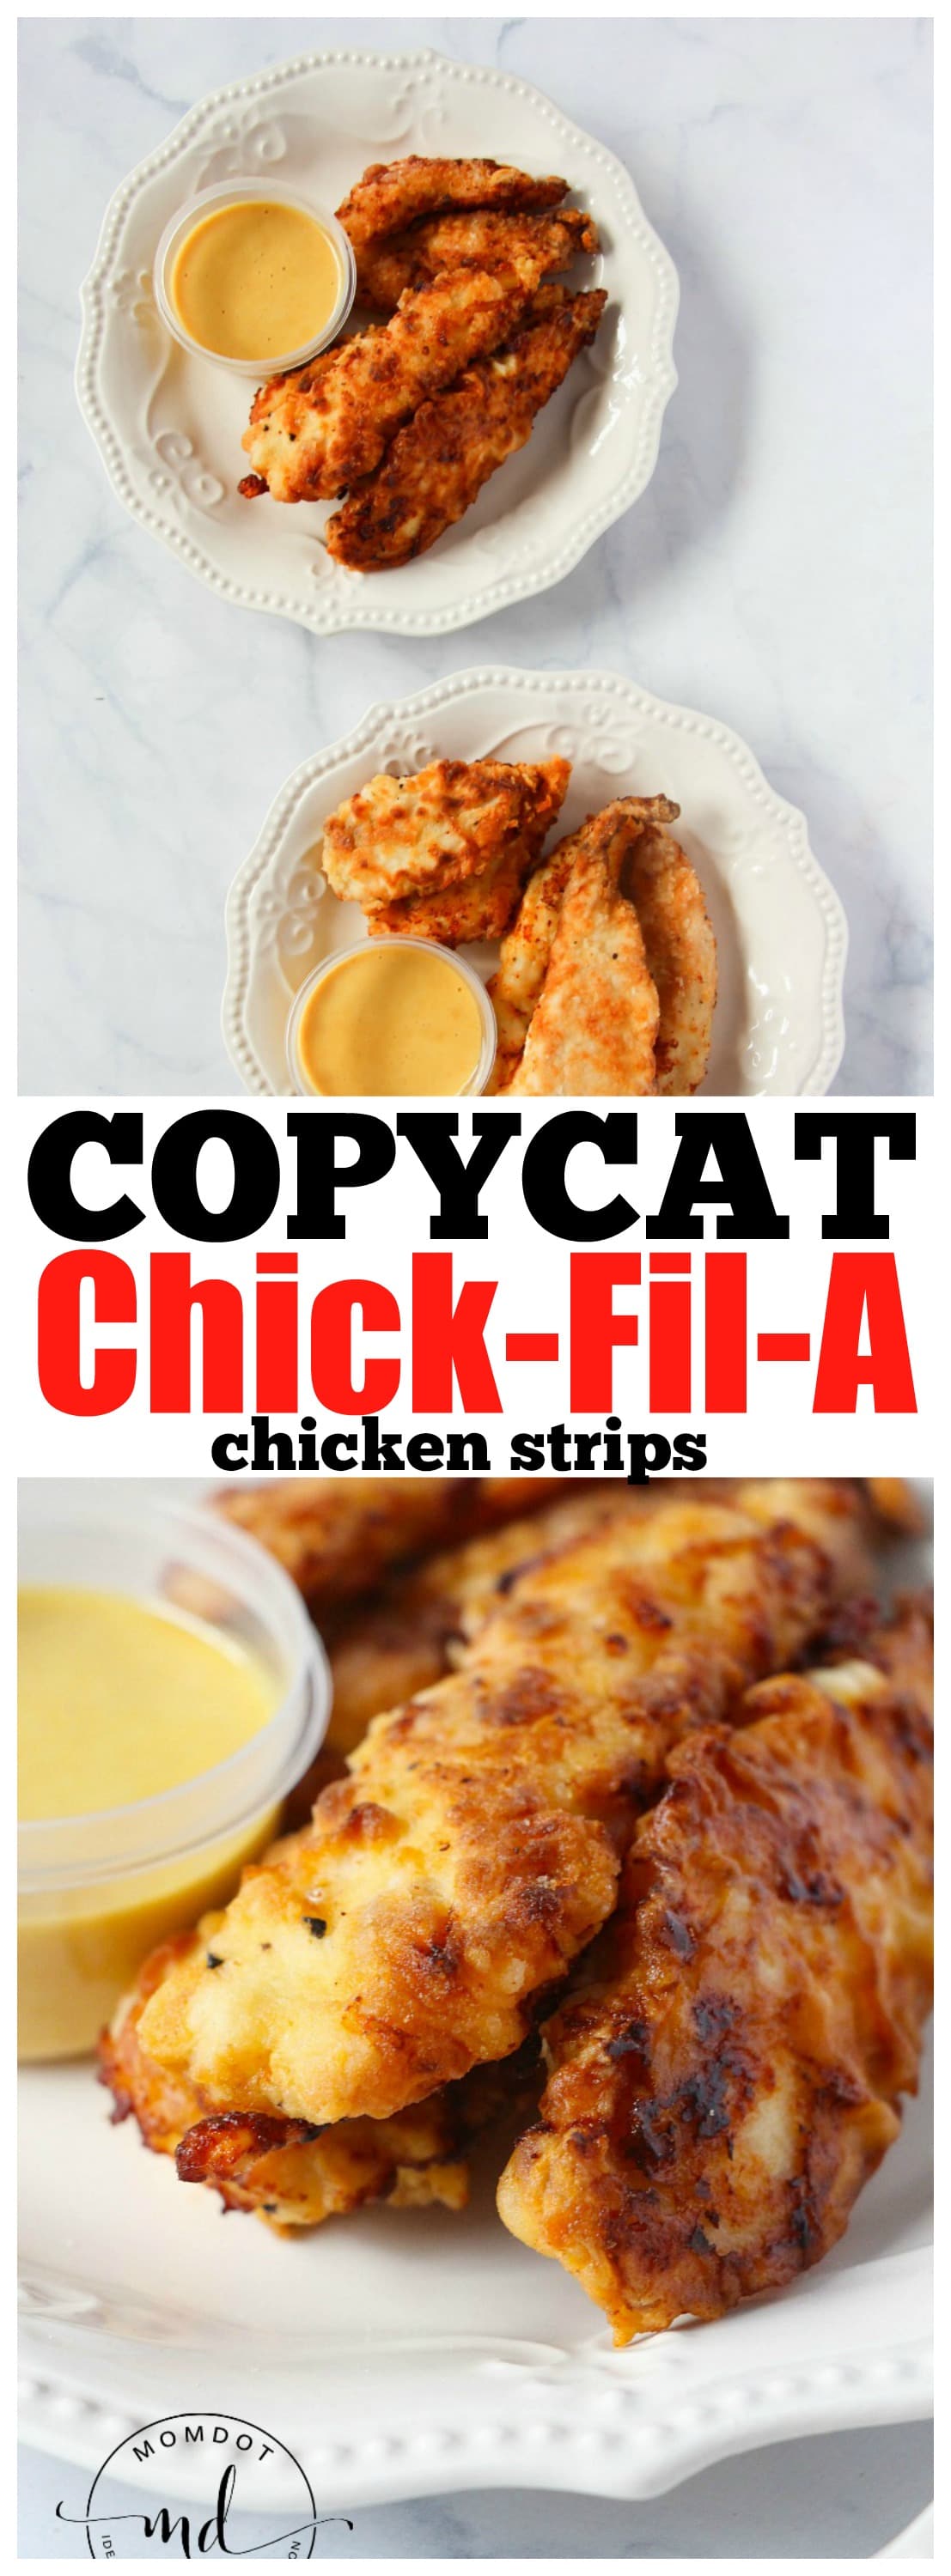 Copycat Chick-Fil-A Chicken Strips (Also make nuggets) - DELICIOUS and PERFECT. Tastes even better at home